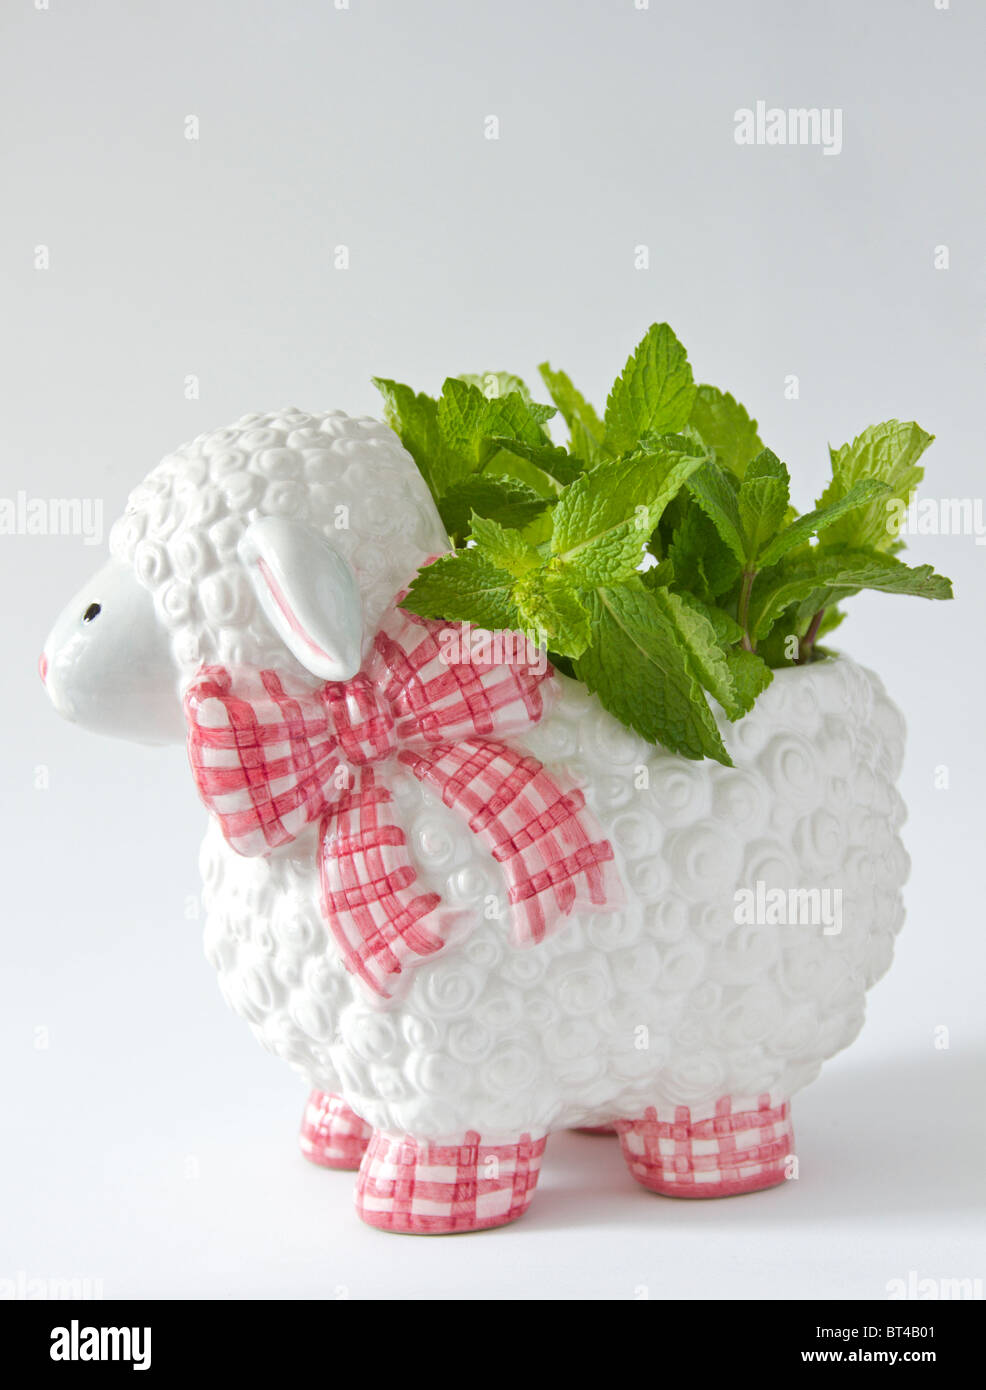 Plant pot in the shape of a lamb with sprigs of mint growing in it Stock Photo